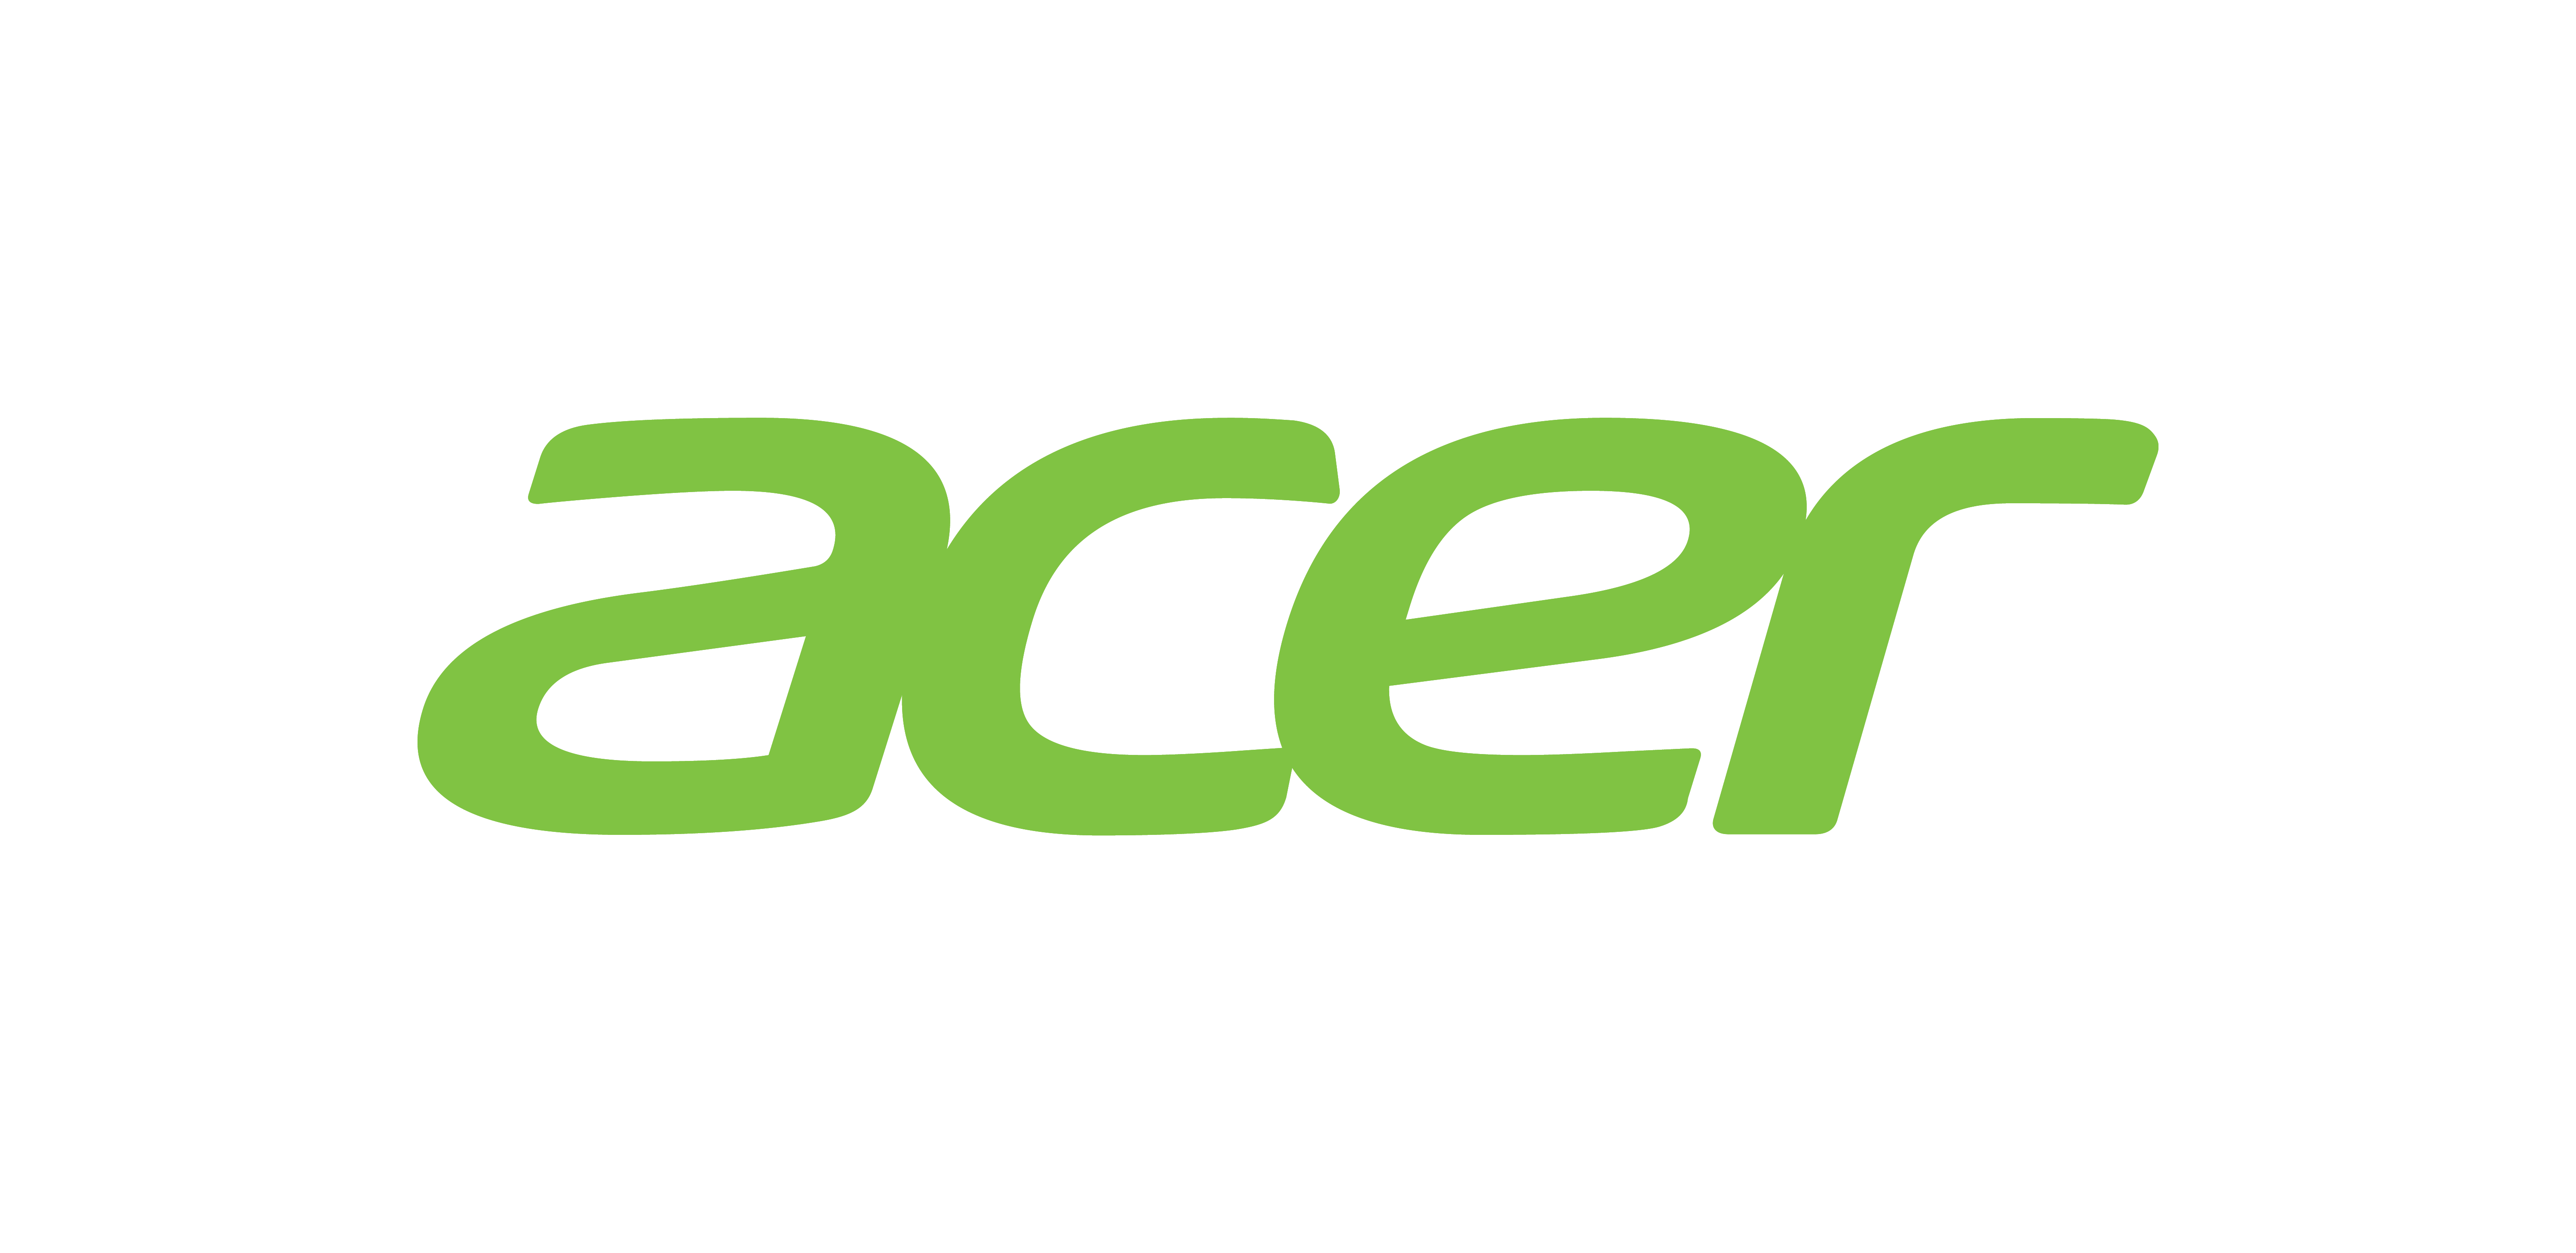 AC Japan Logo & Acer Logo in Heatover land in low pitch - YouTube